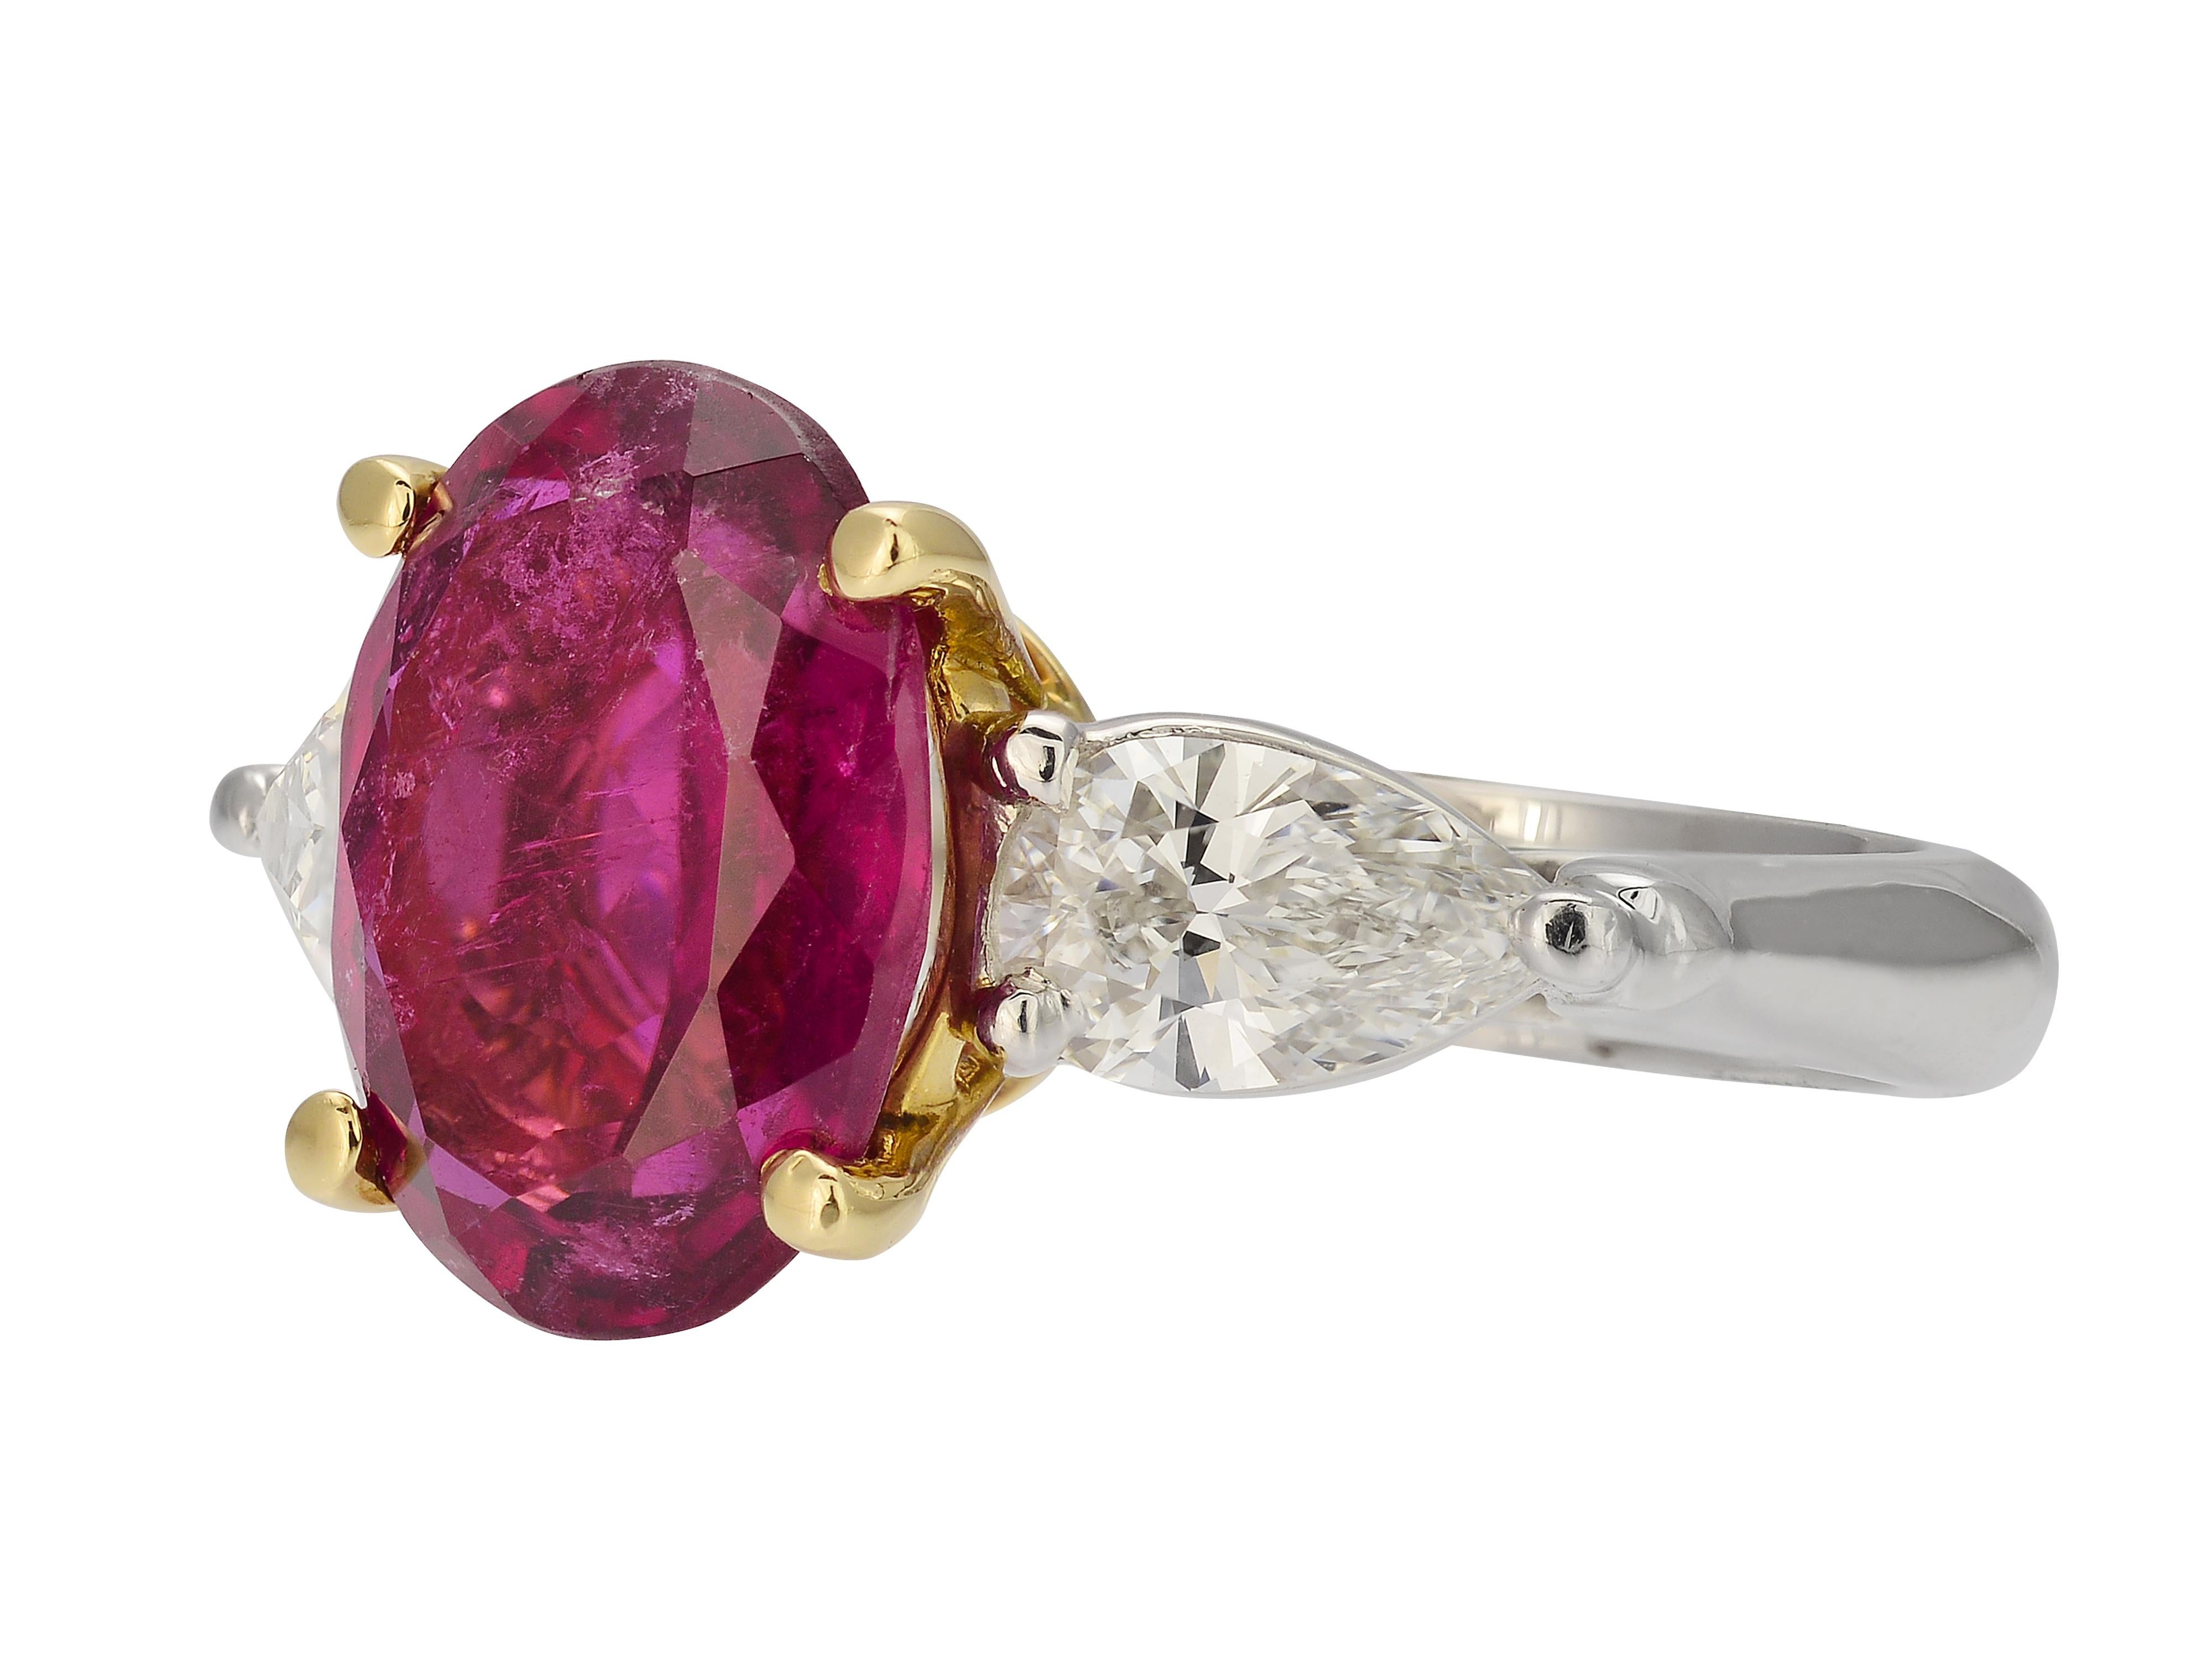 Platinum & 18 Karat Yellow Gold Cocktail Ring Featuring A 4.06 Carat Oval Cut Pink Tourmaline With 2 Pear Shaped Diamonds Totaling 1.02 Carats Of VS2 Clarity & F Color. Natural Inclusions Visible In Tourmaline. Hidden Hearts Under Gallery. Purchase